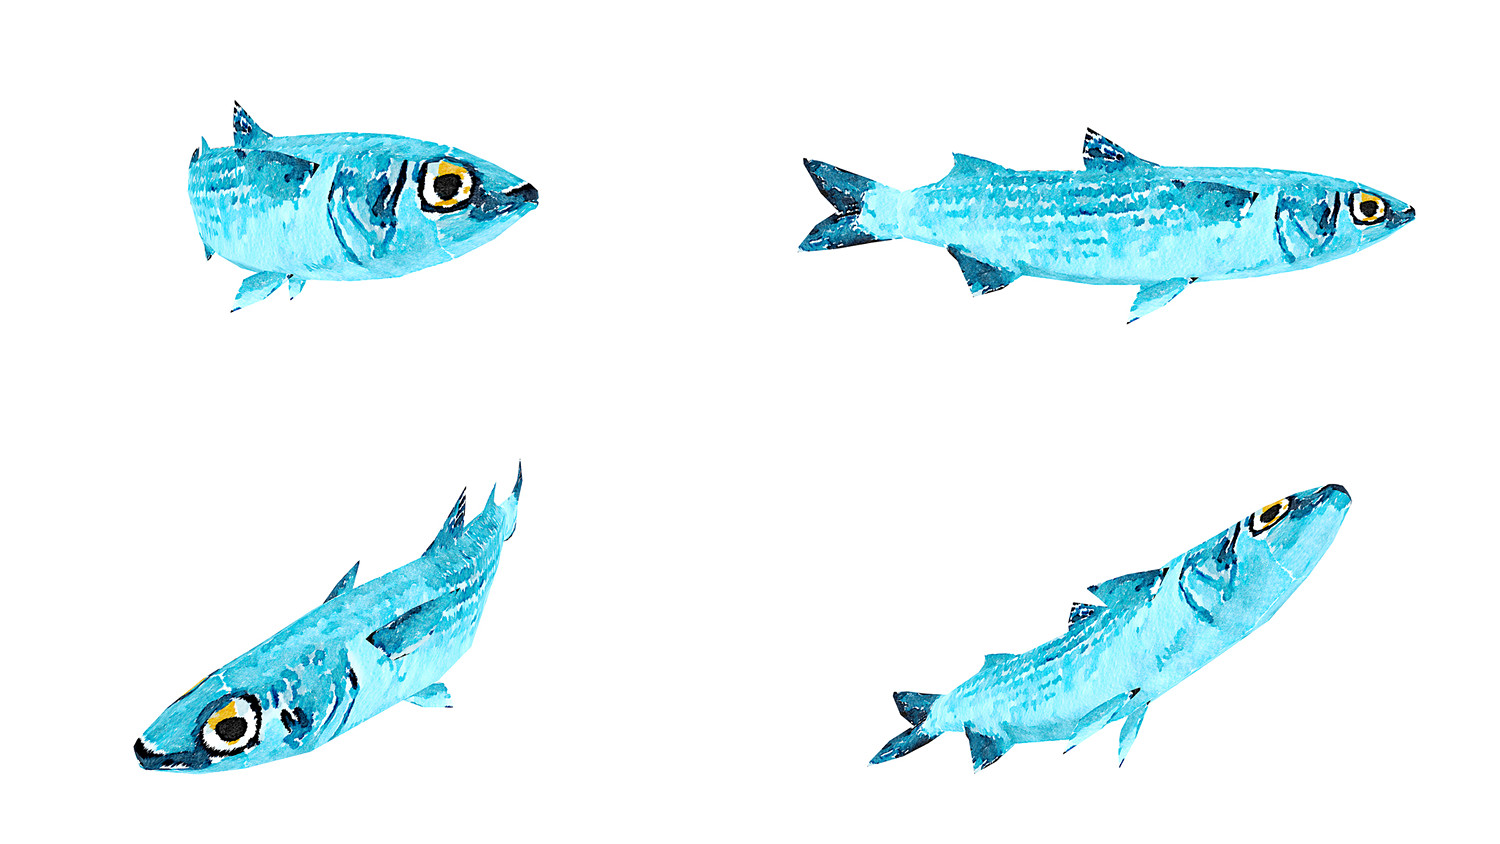 Fish Illustration Collection Part 4 - Animated